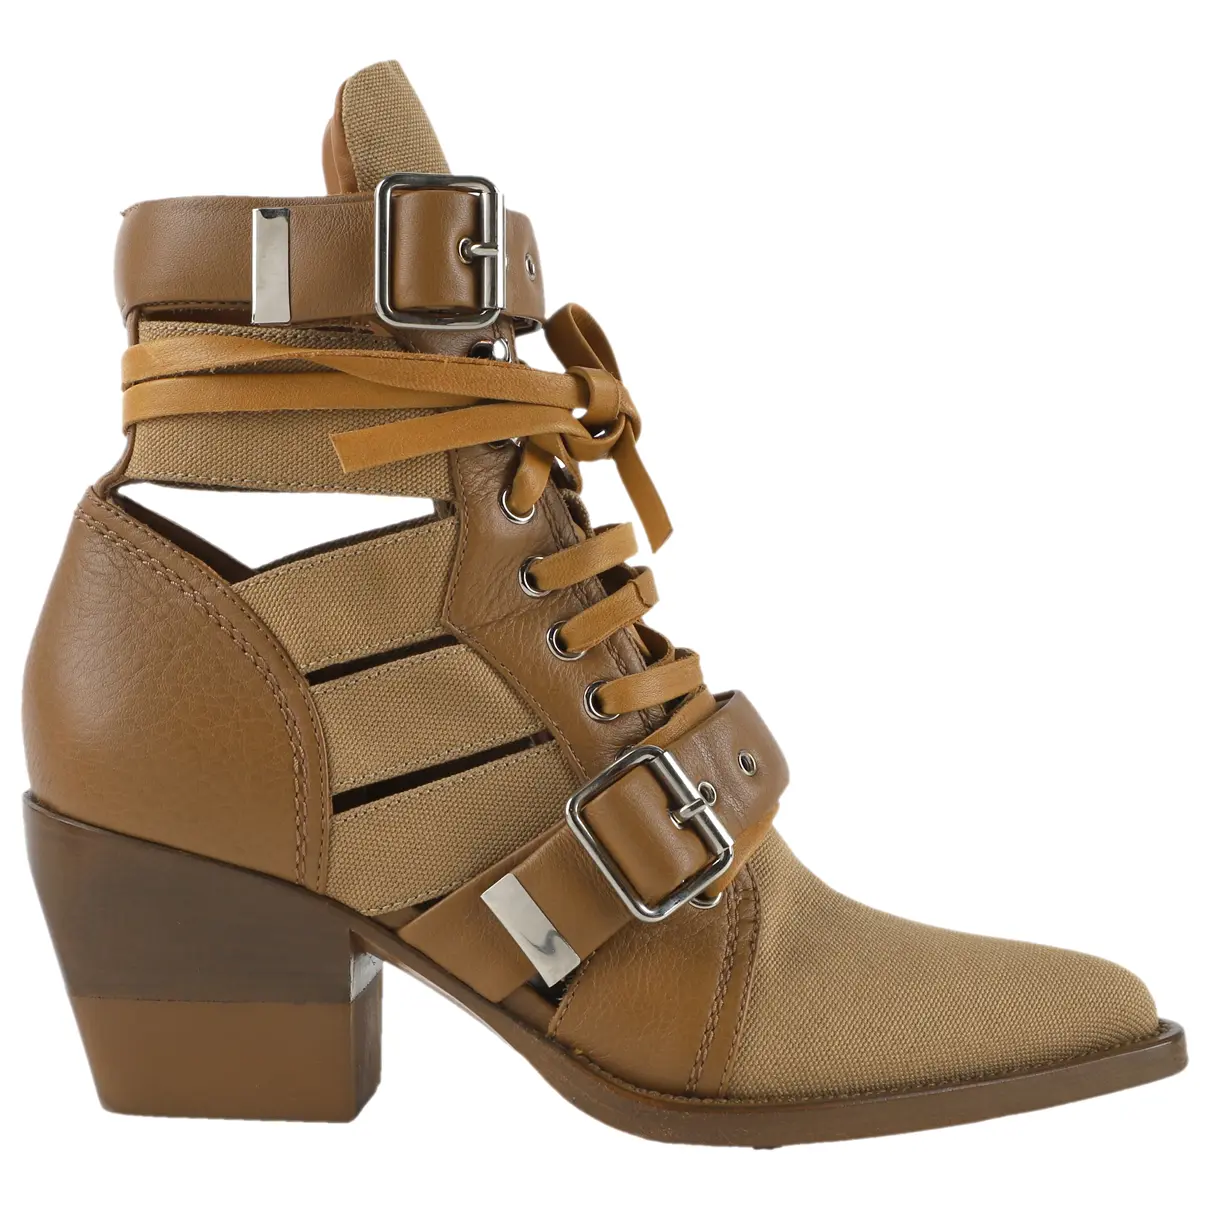 Rylee cloth lace up boots